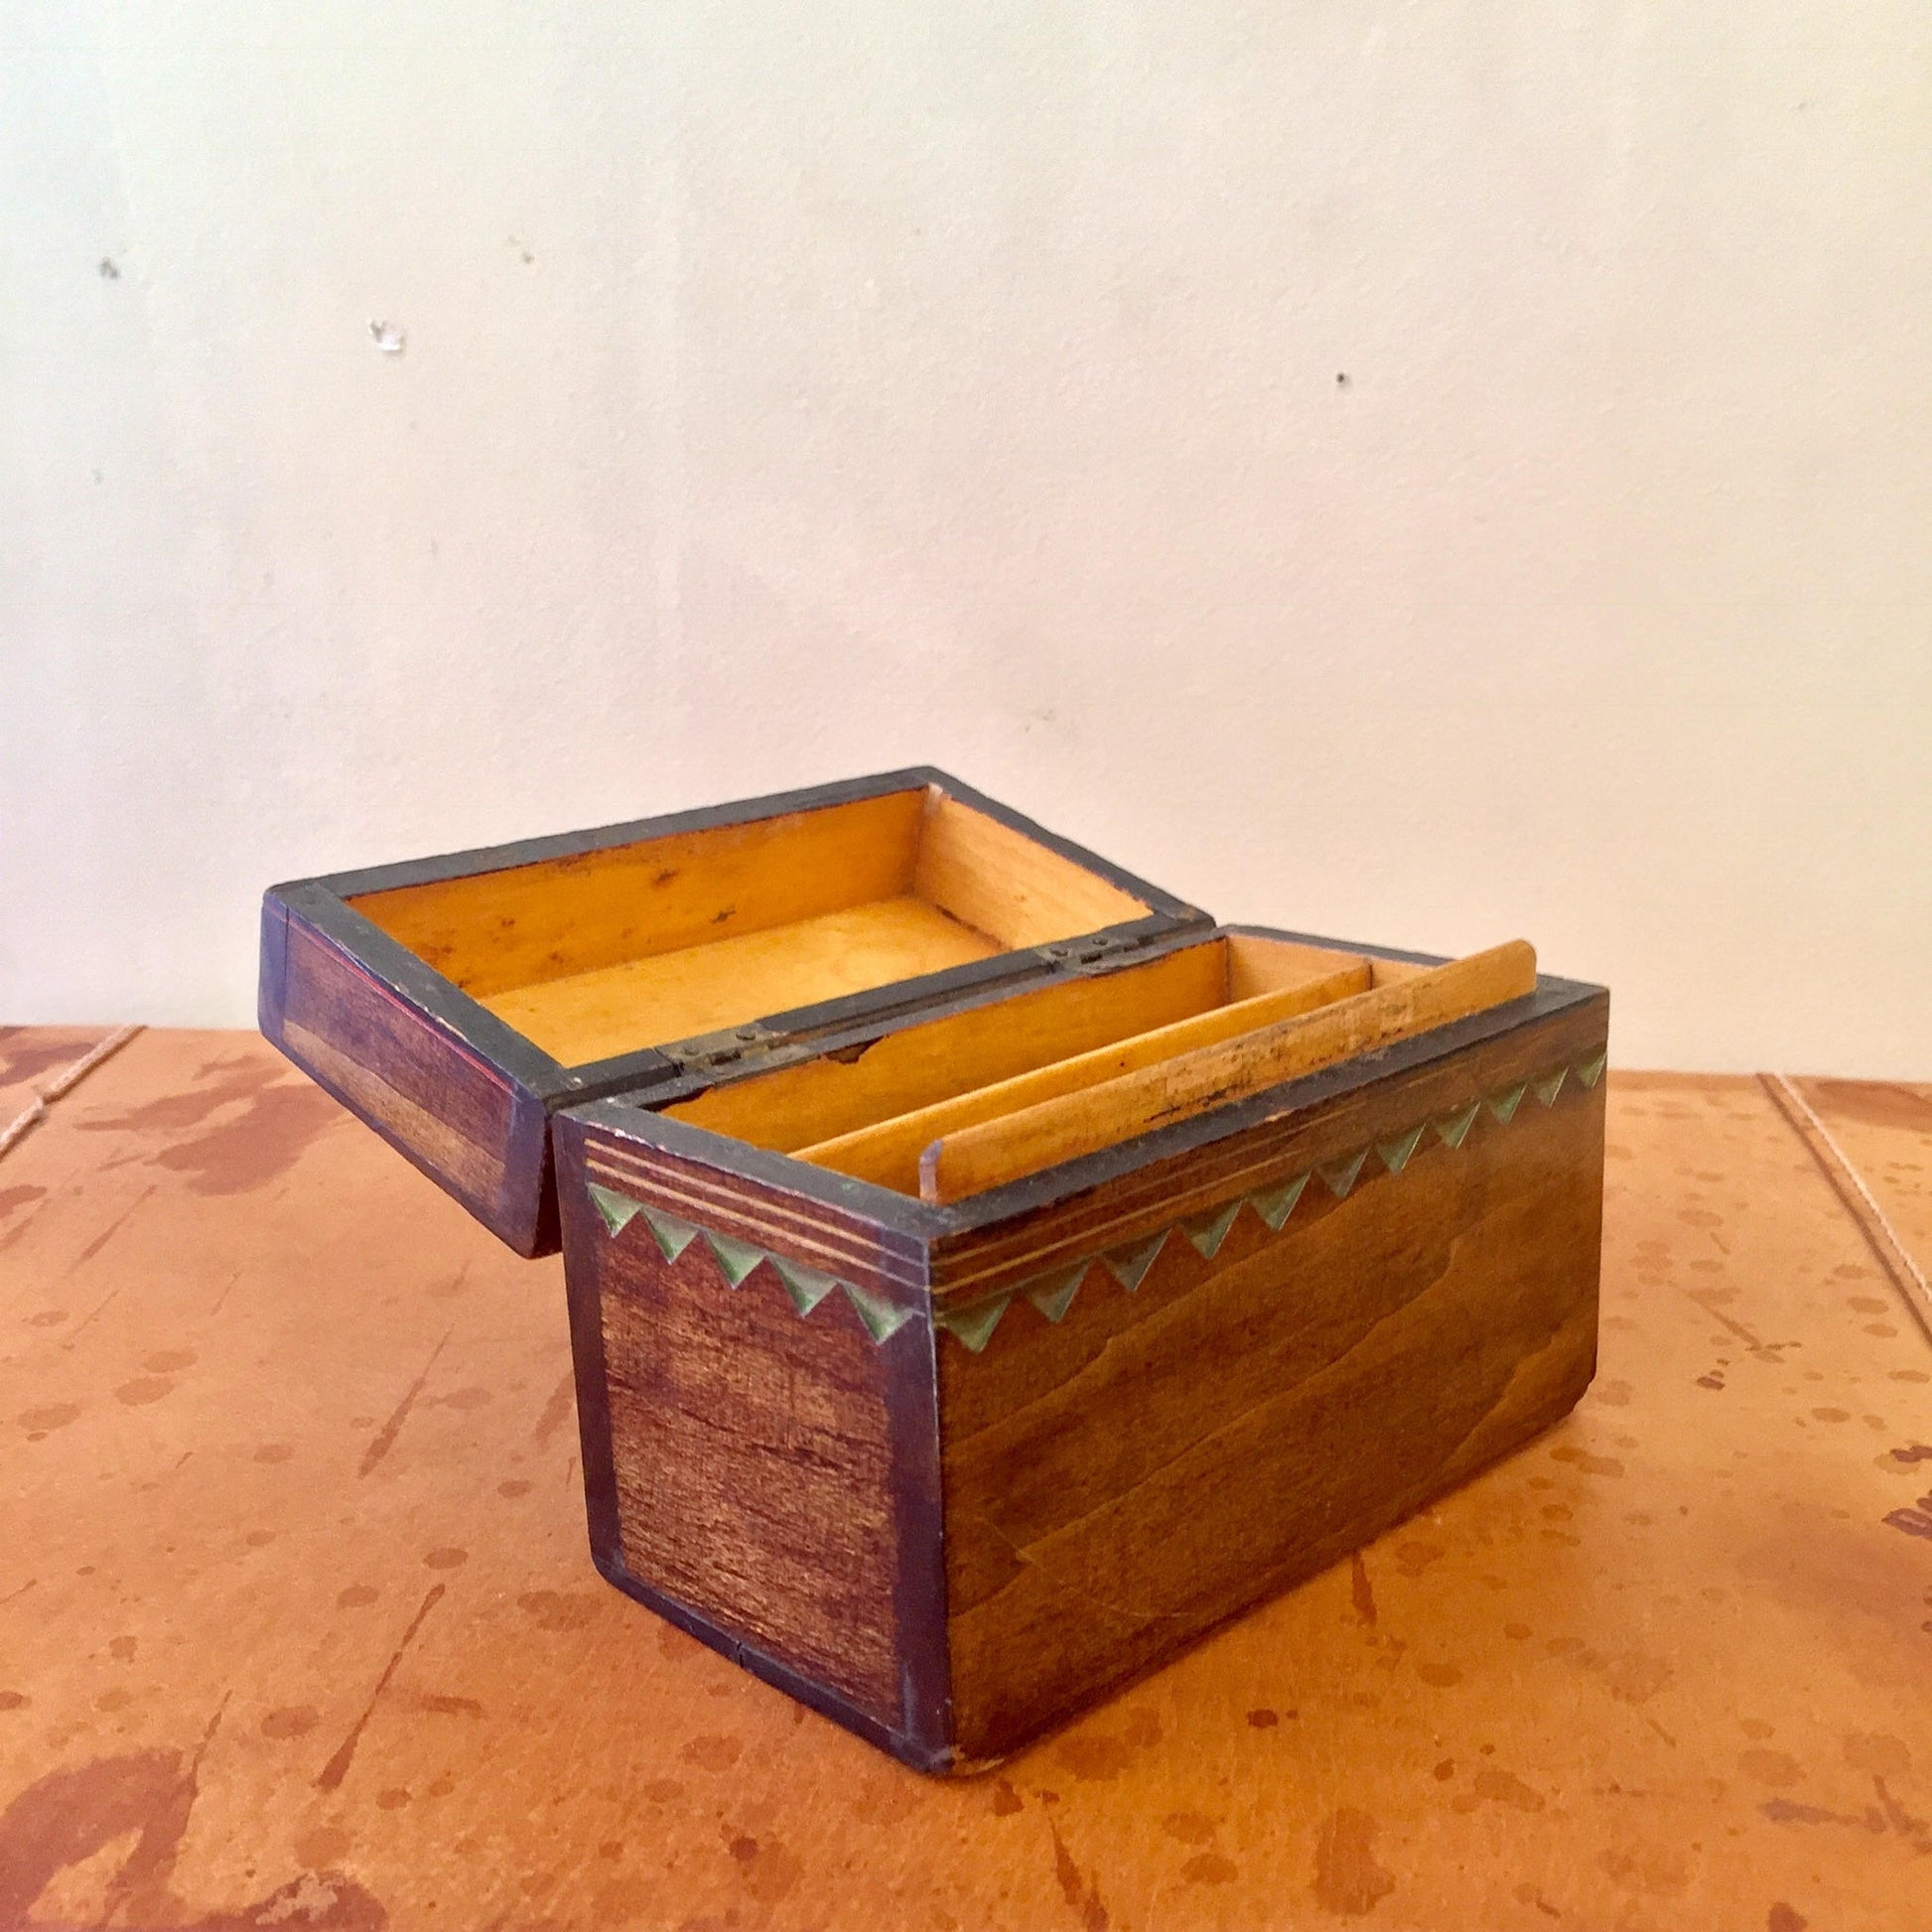 Rustic hand-carved wooden box with colorful geometric patterns, featuring a sliding lid and yellow interior, sitting on a wooden surface.